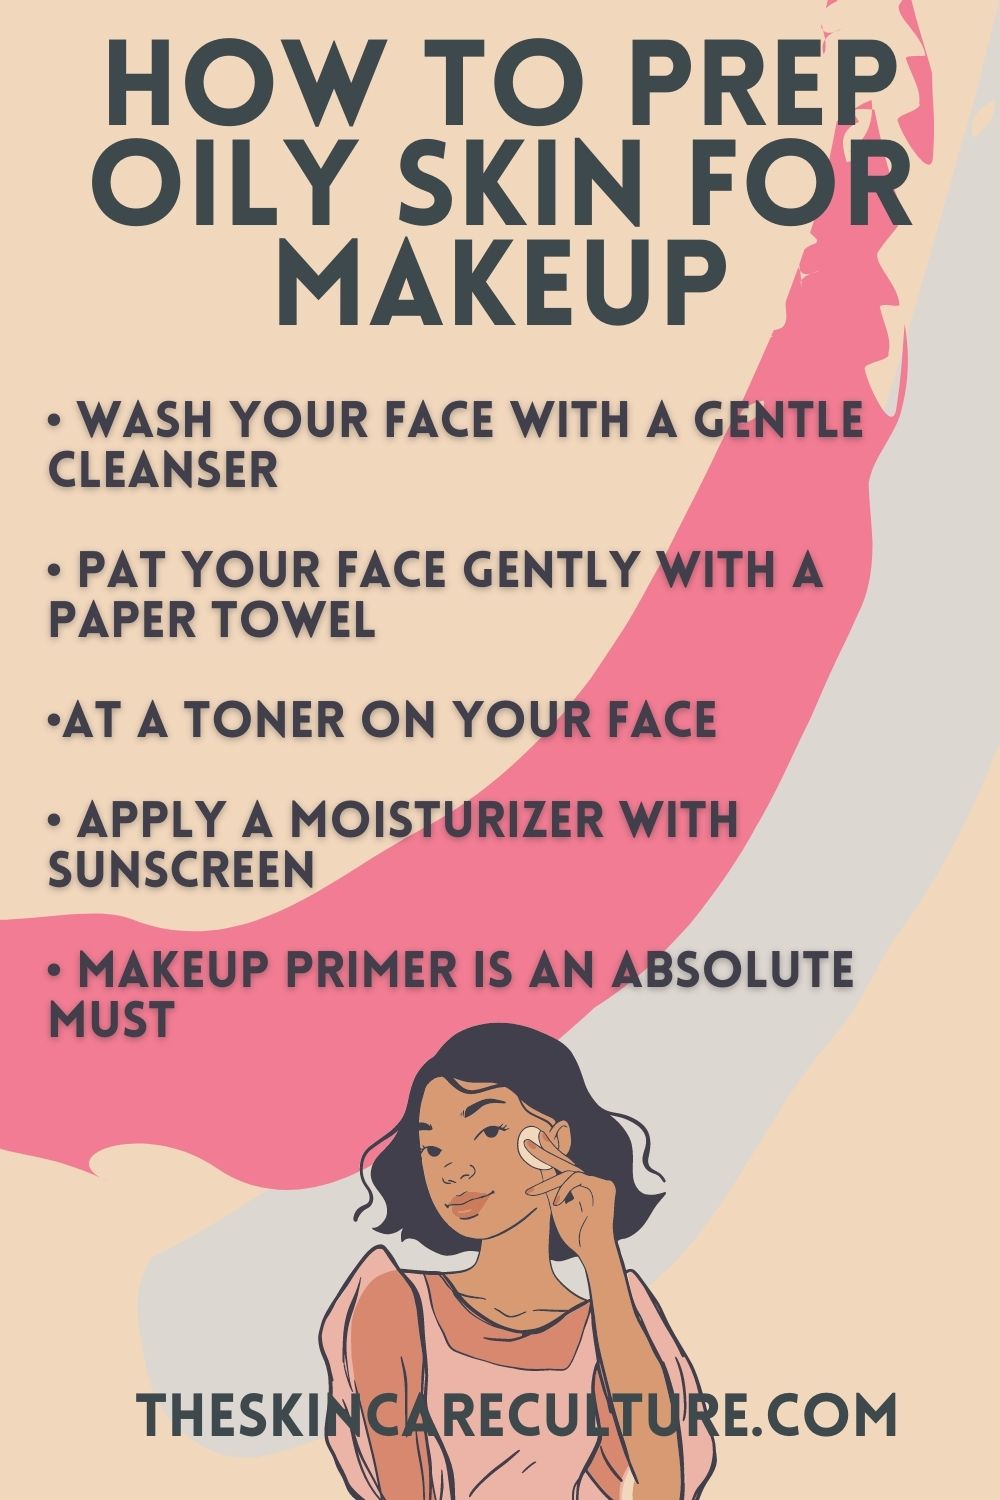 how to prep oily skin for makeup